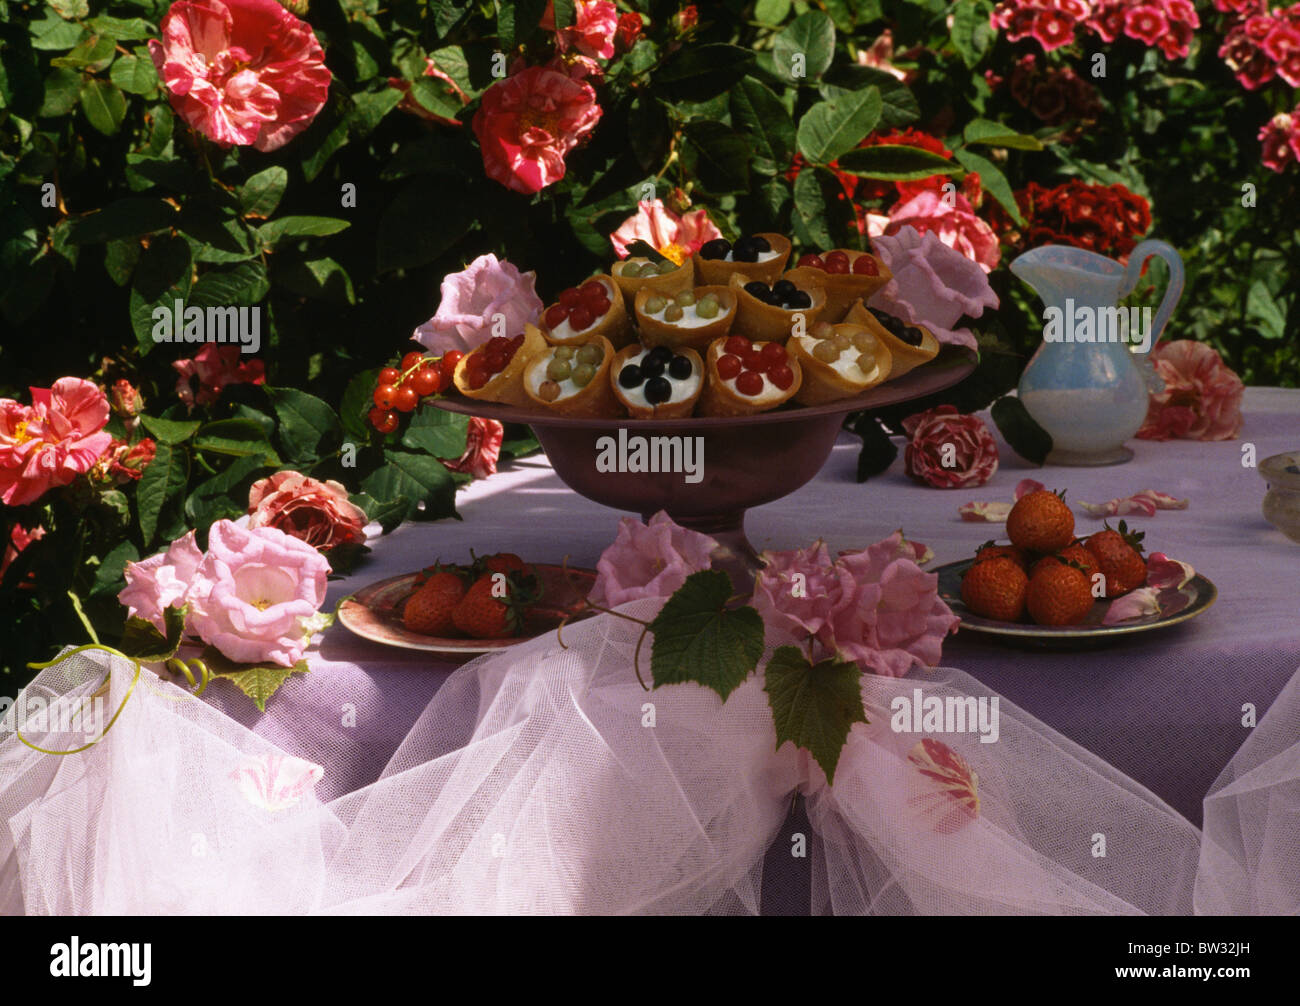 Still-Life of small cakes on pedestal on garden table swathed with white organza and decorated with pink roses Stock Photo